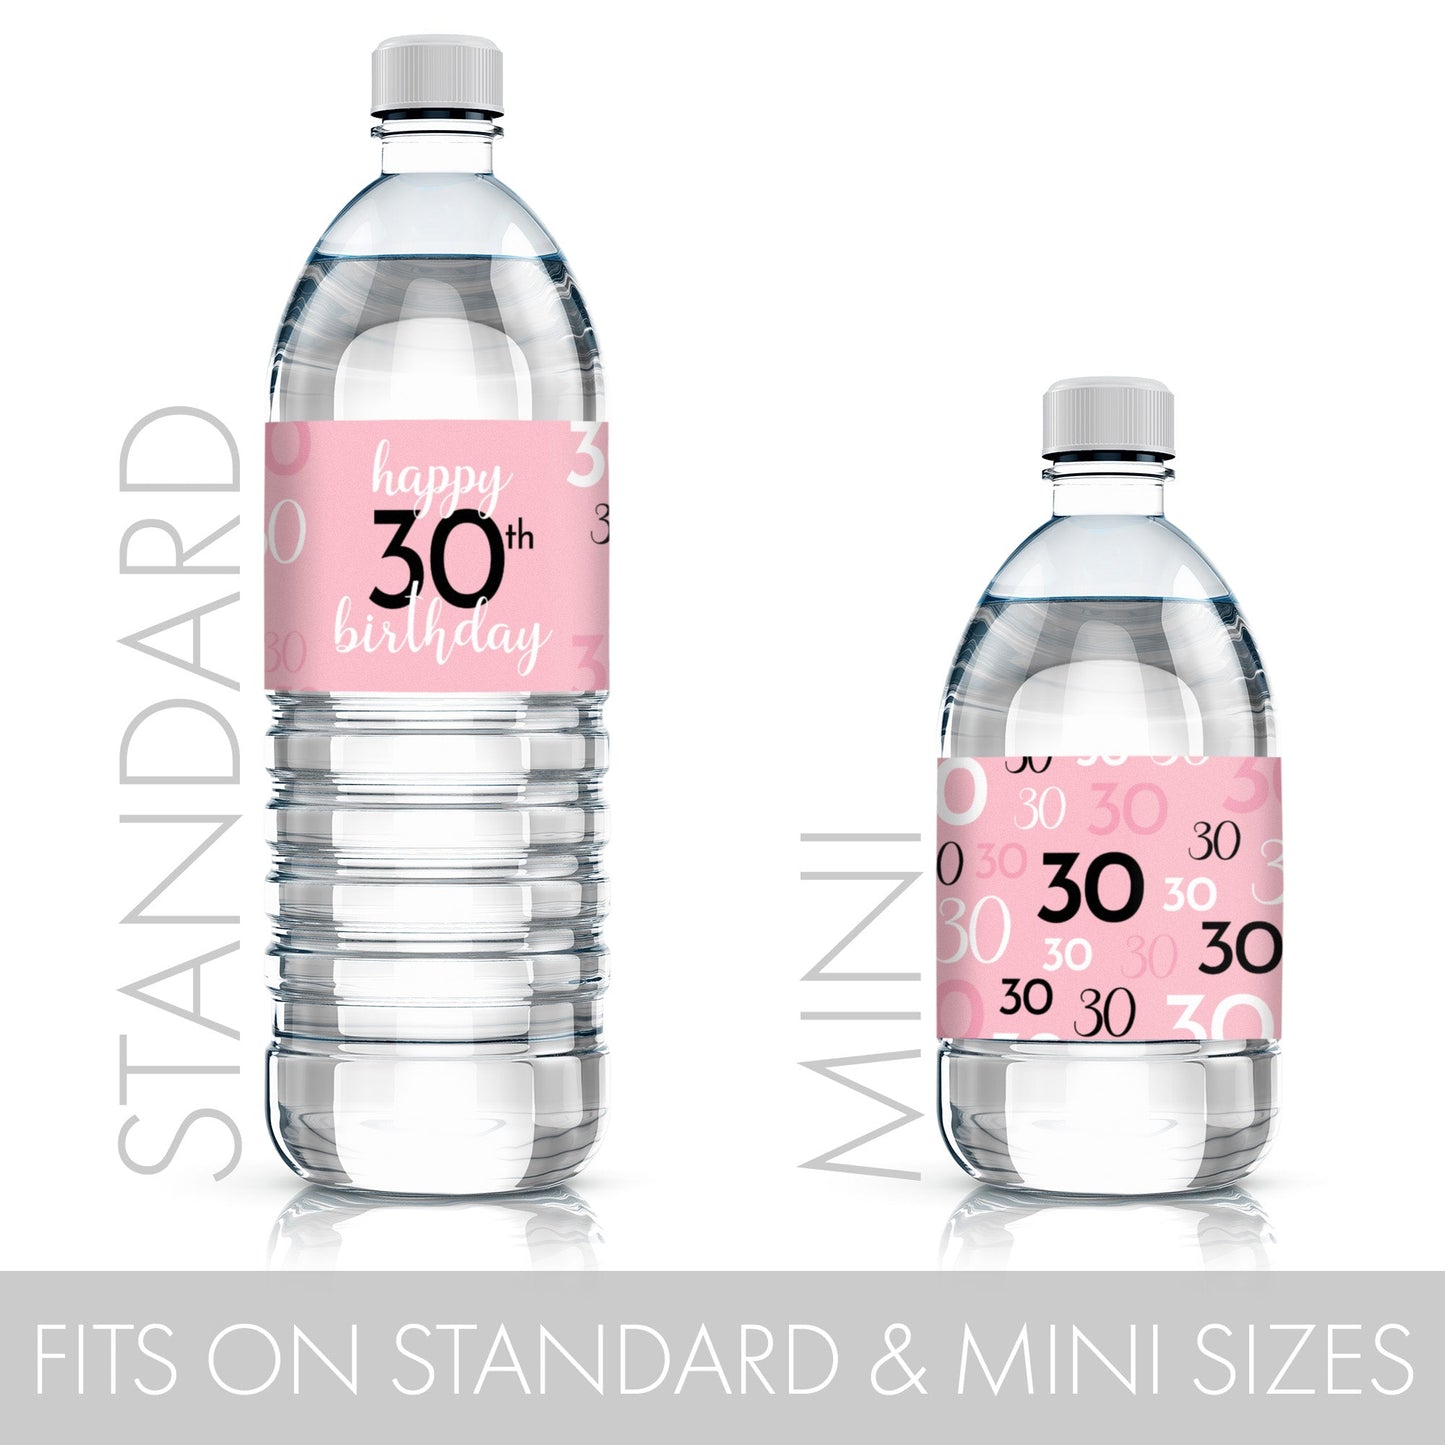 Celebrate in style with pink and black water bottle labels for your 30th birthday